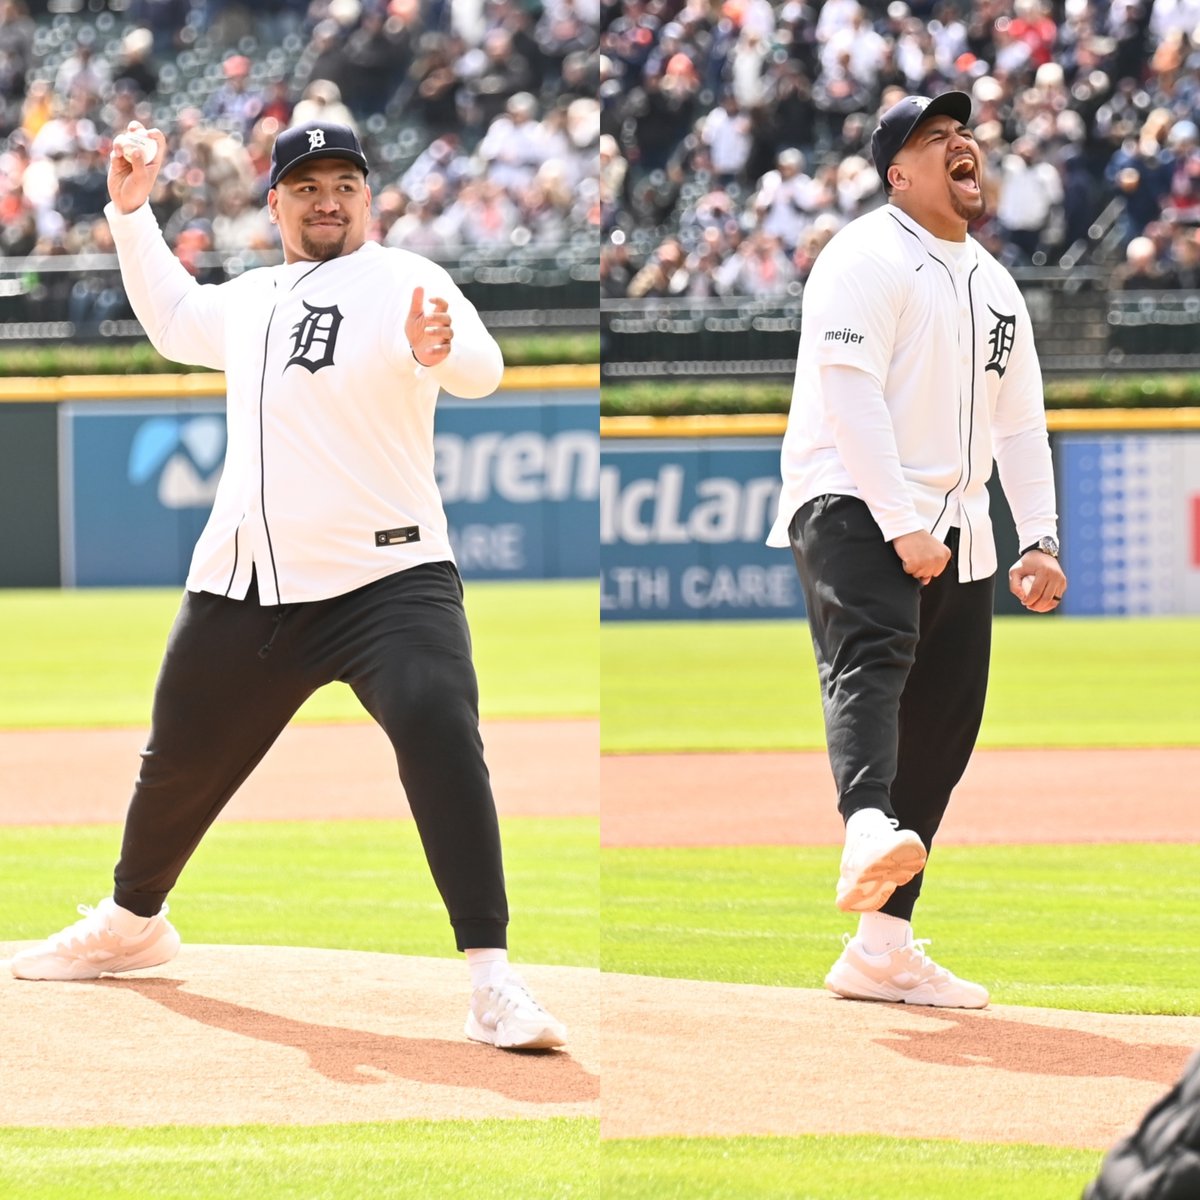 Lions offensive tackle Penei Sewell threw out the first pitch at today's Tigers game and he was STOKED 😂